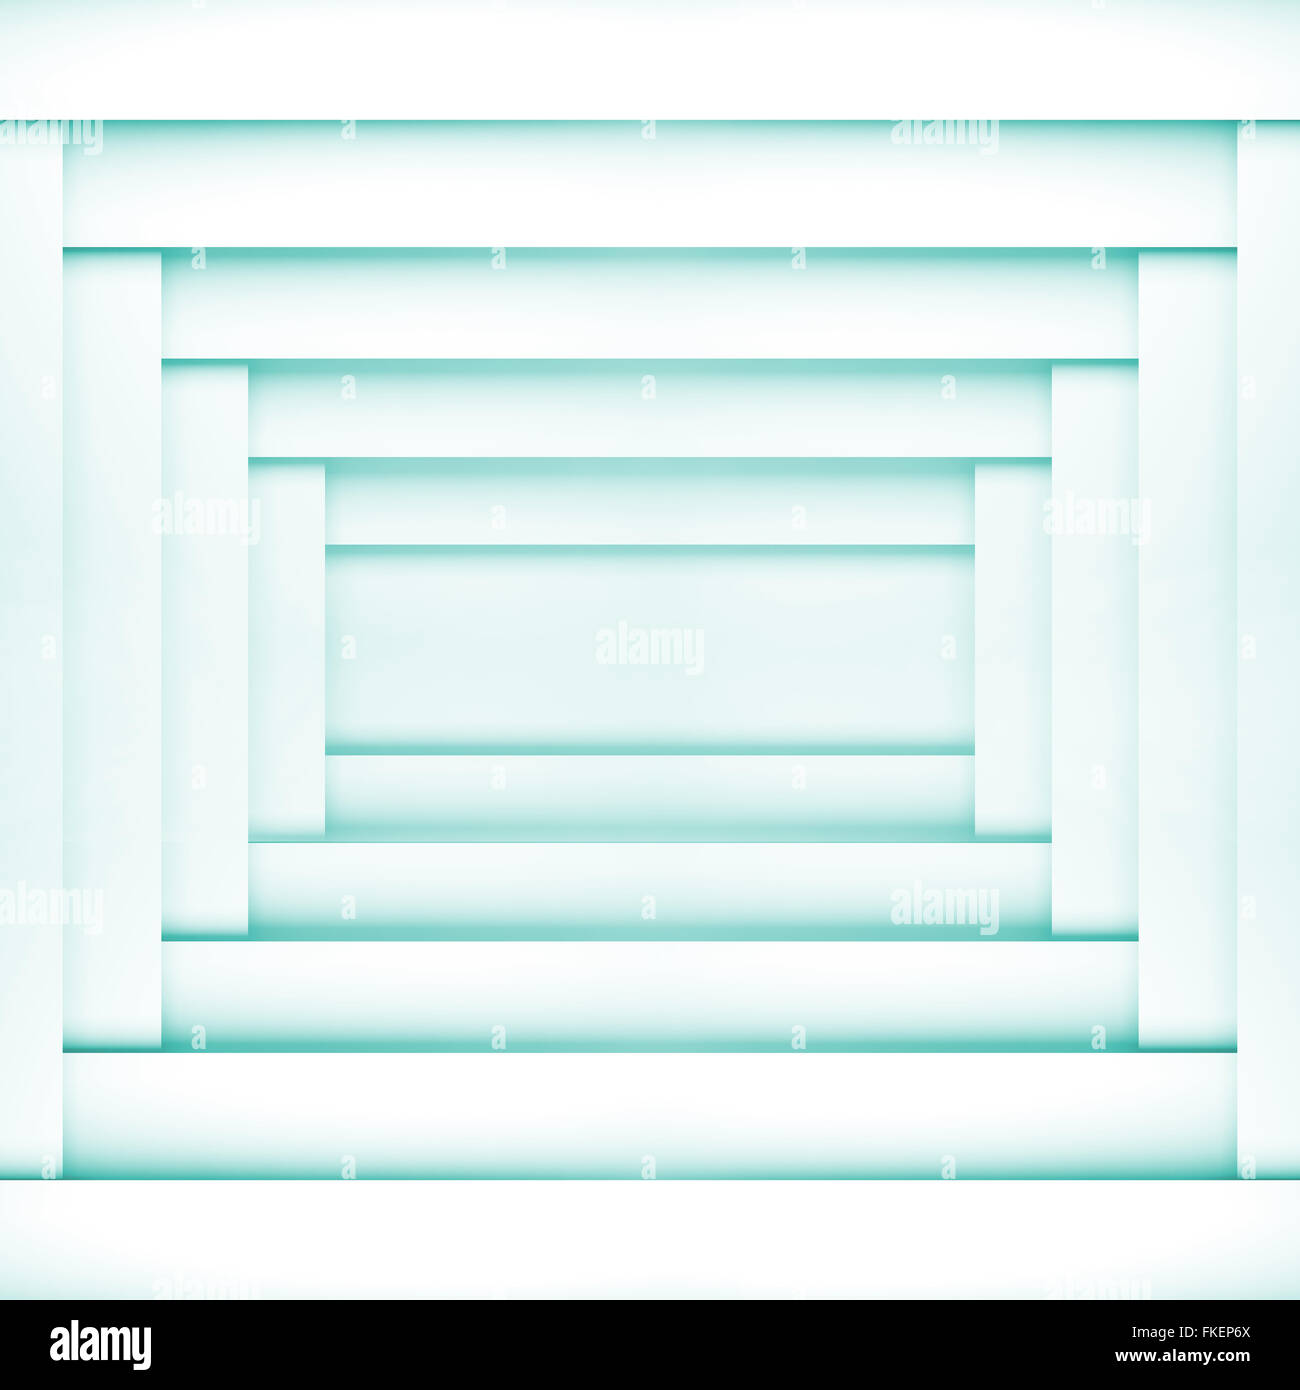 Abstract digital illustration, blue and white geometric background with rectangle frames pattern Stock Photo